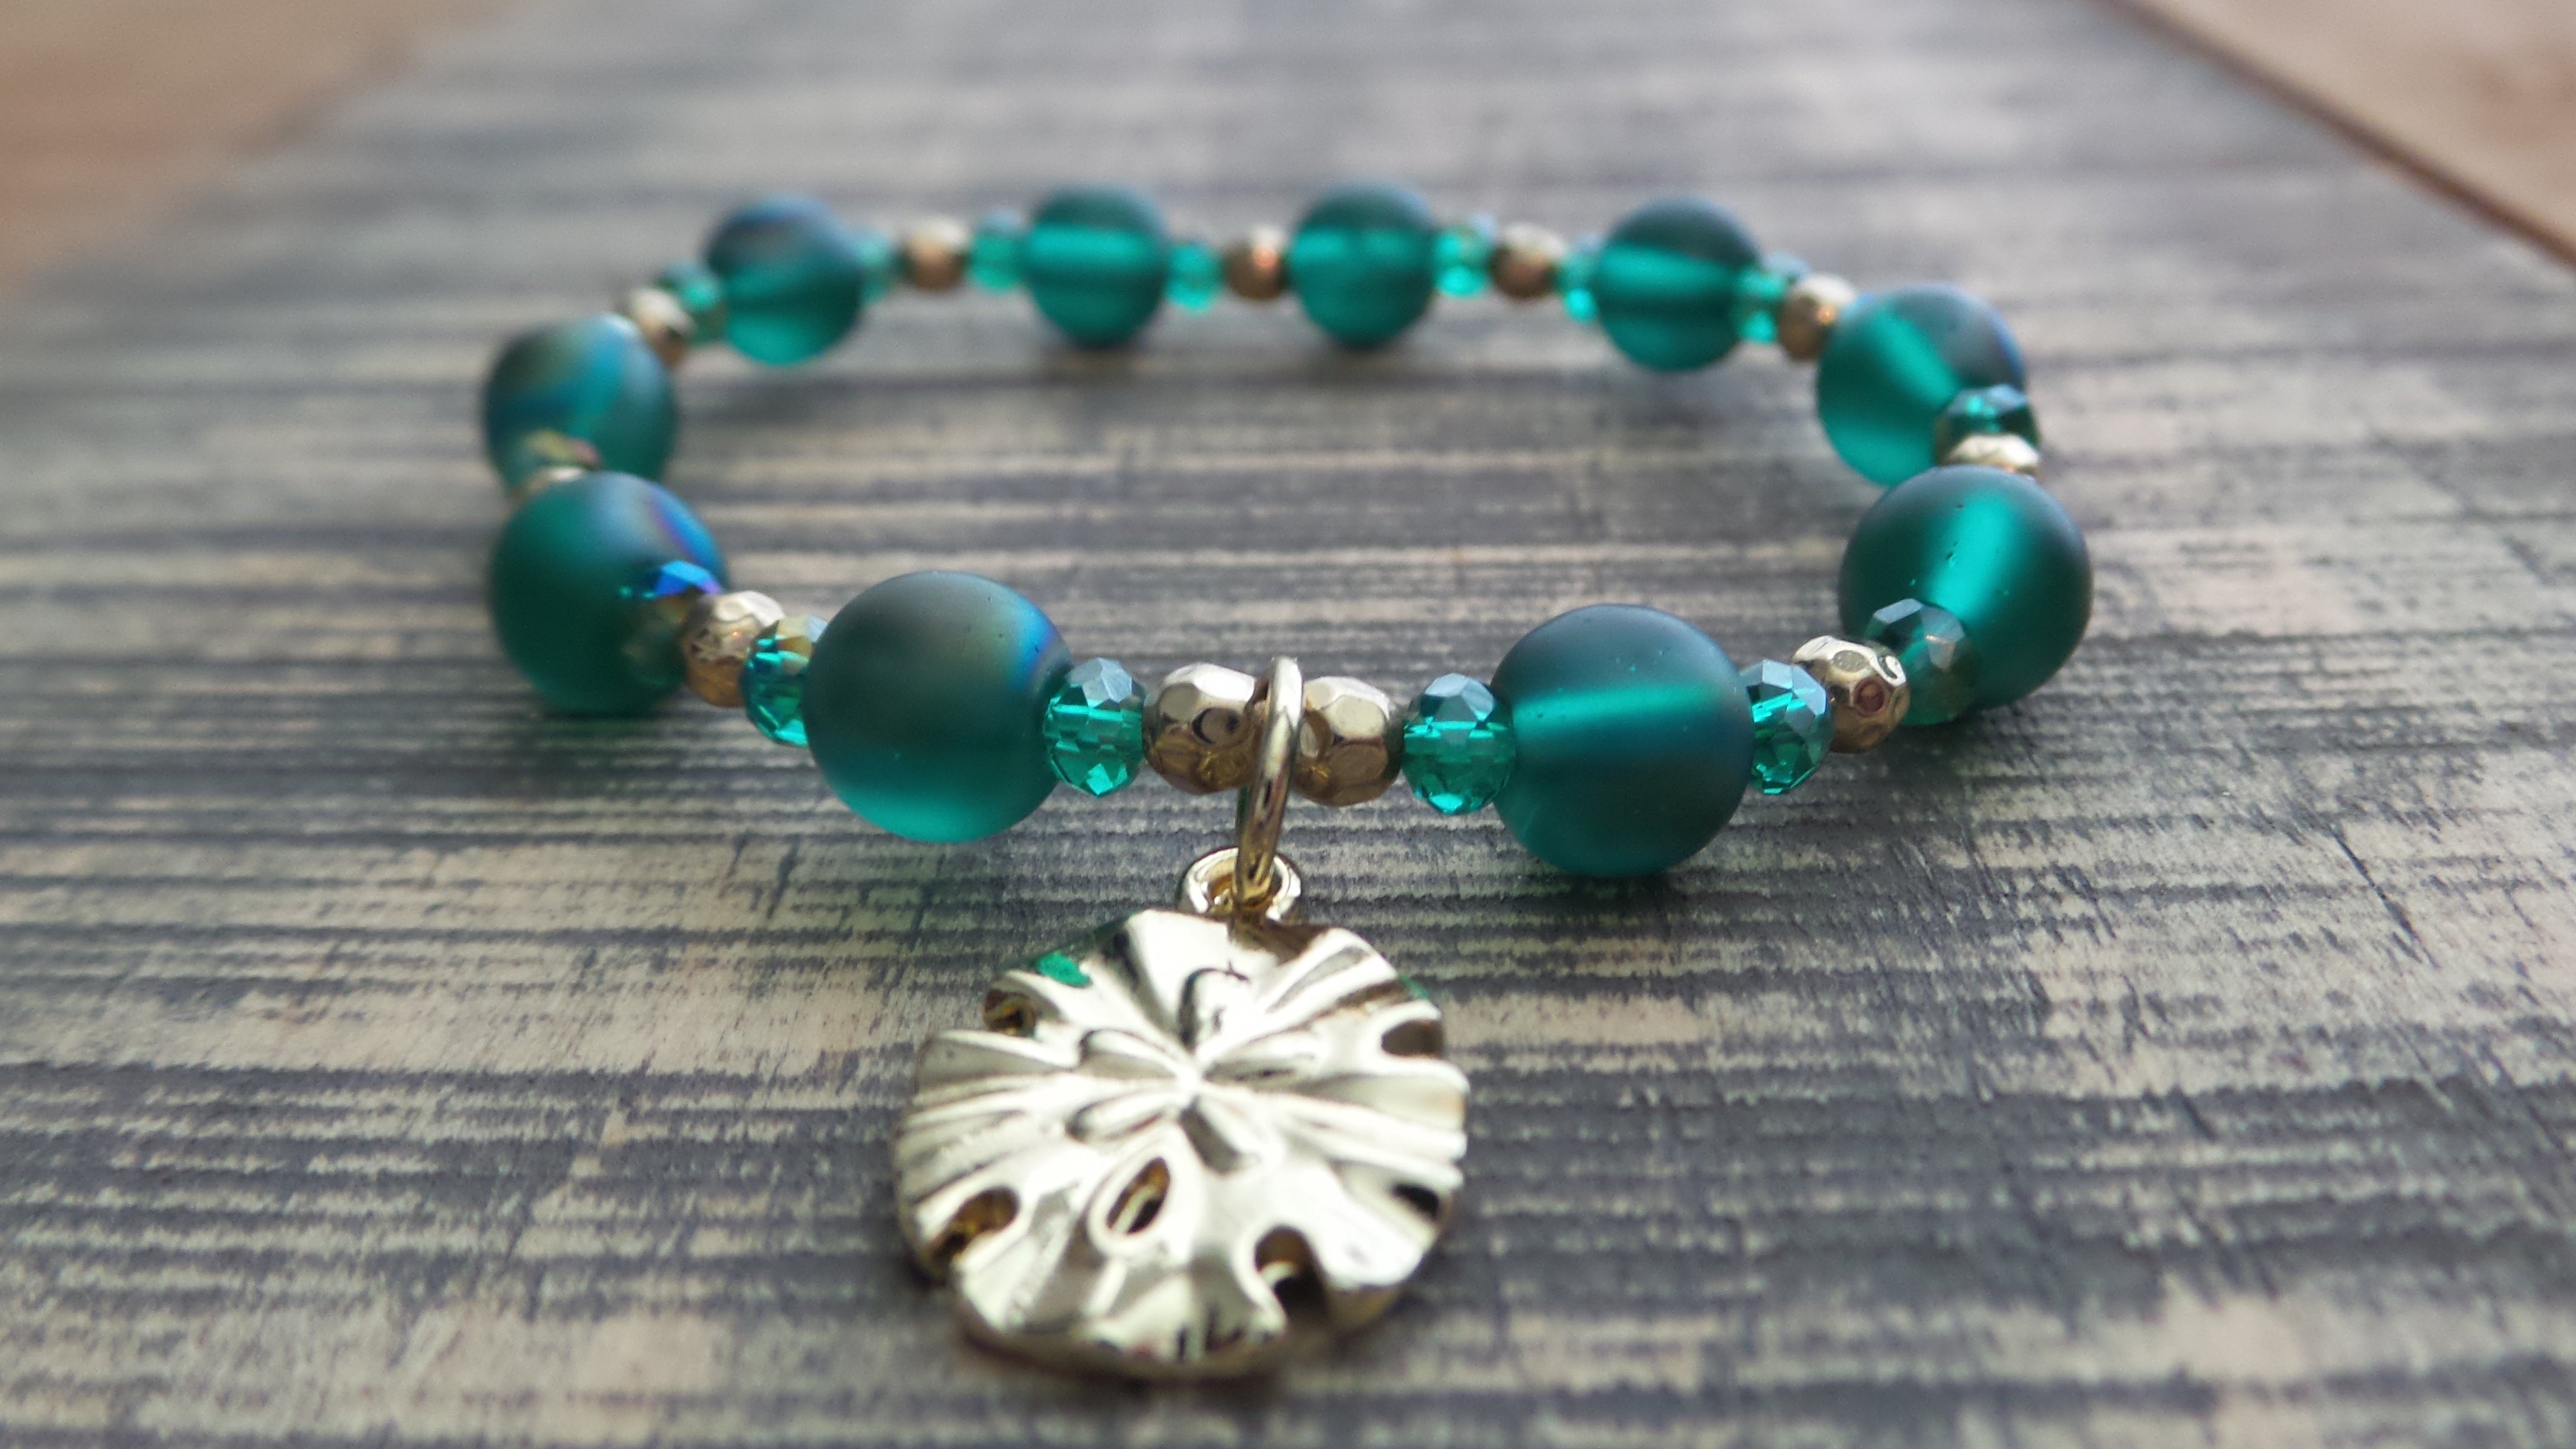 Bracelet- Iridescent Green and Gold with Gold Sand Dollar